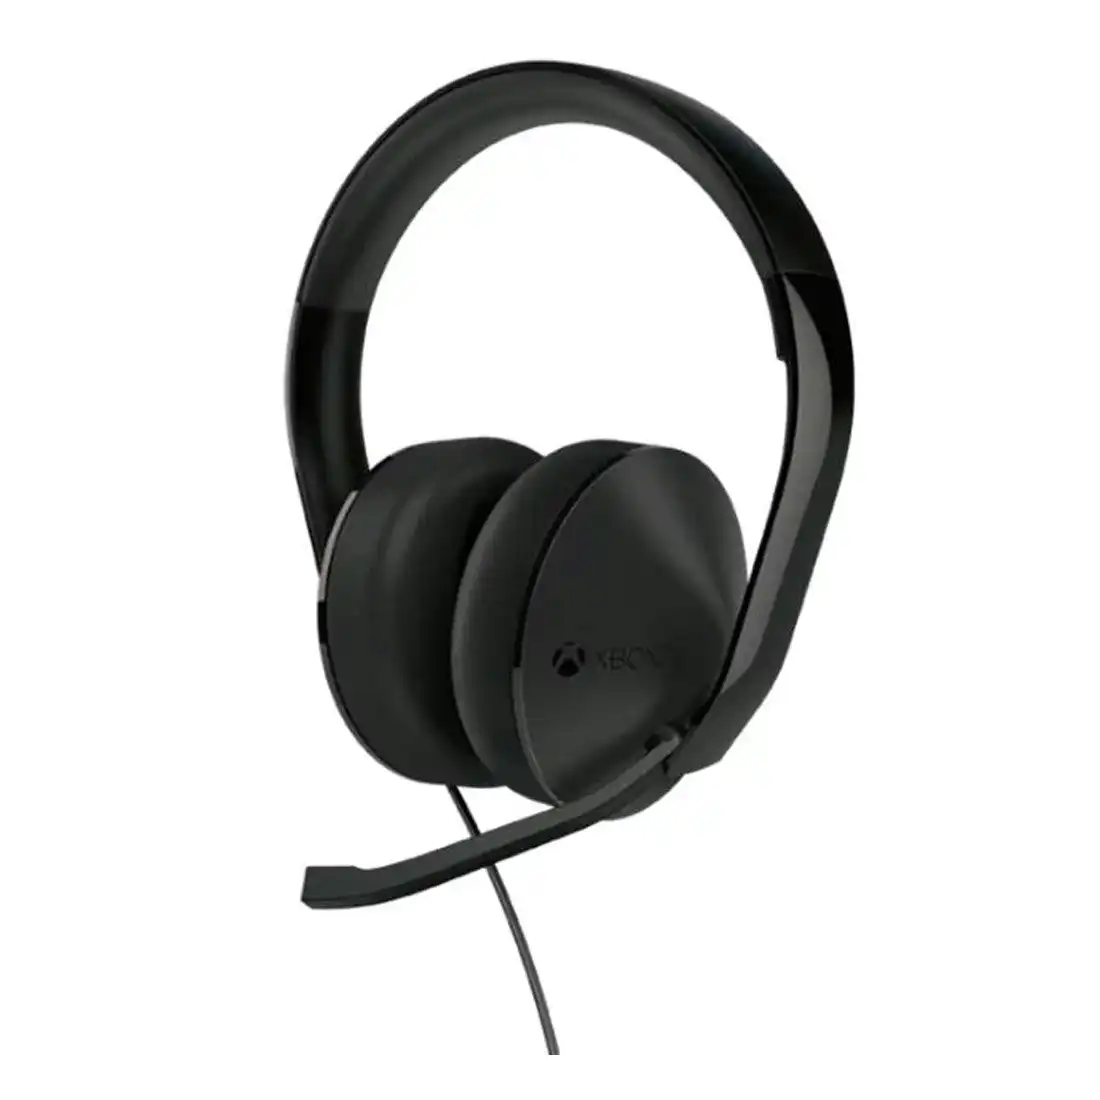 Xbox One Stereo Wired Headset S4V-00014 - Black